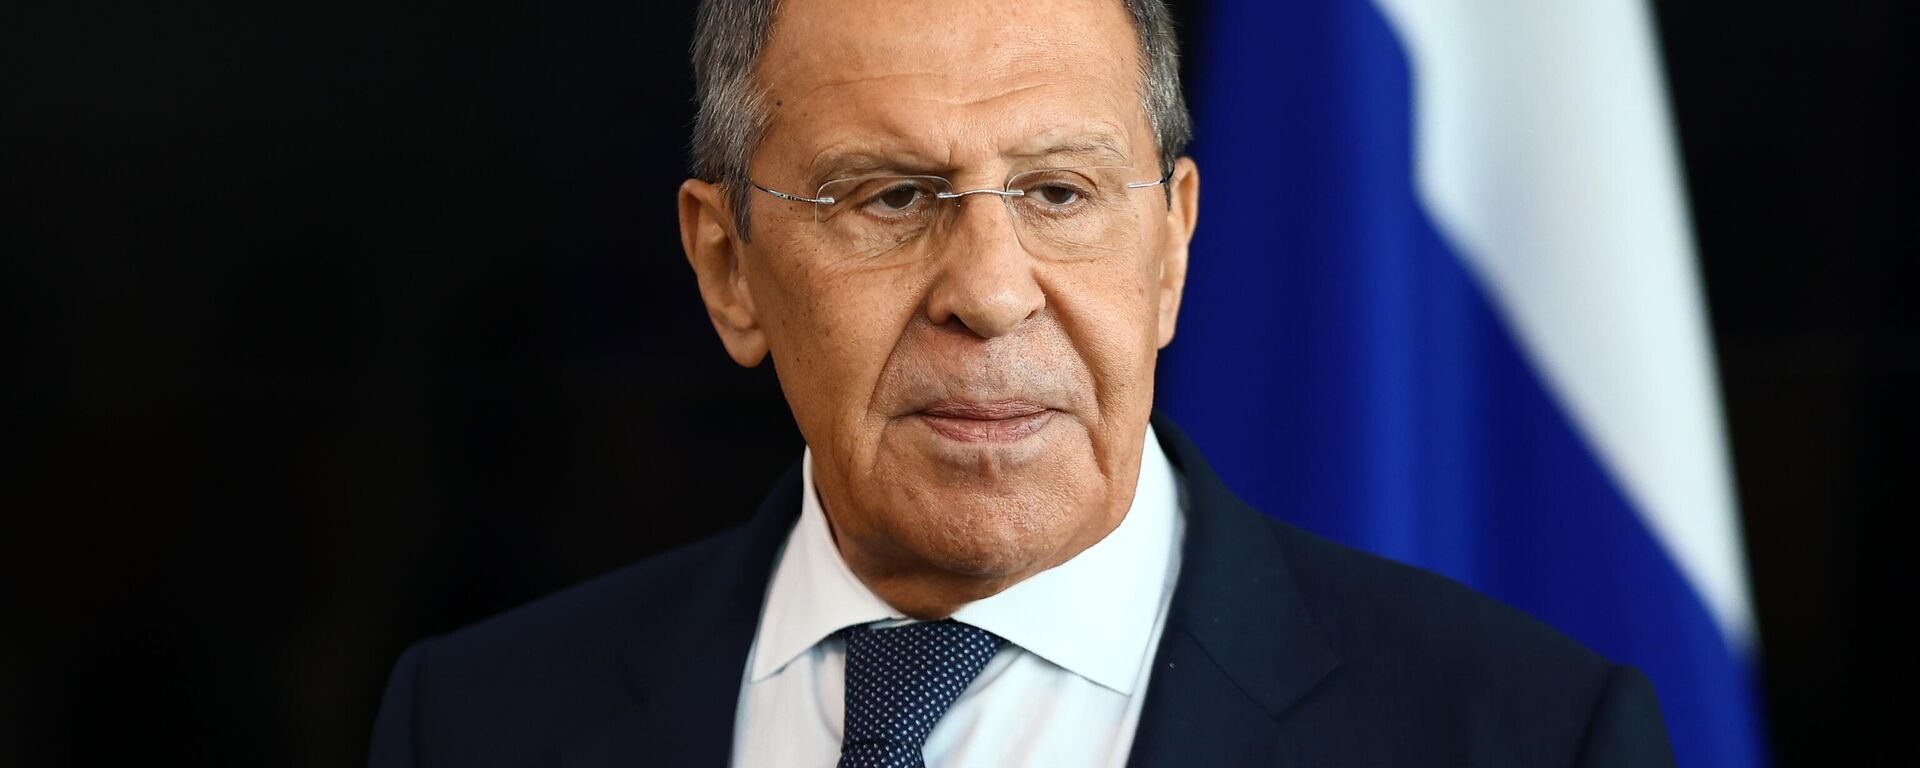 Russian Foreign Minister Sergey Lavrov takes part at  the 2022 ASEAN summit in Phnom Penh - Sputnik International, 1920, 18.01.2023